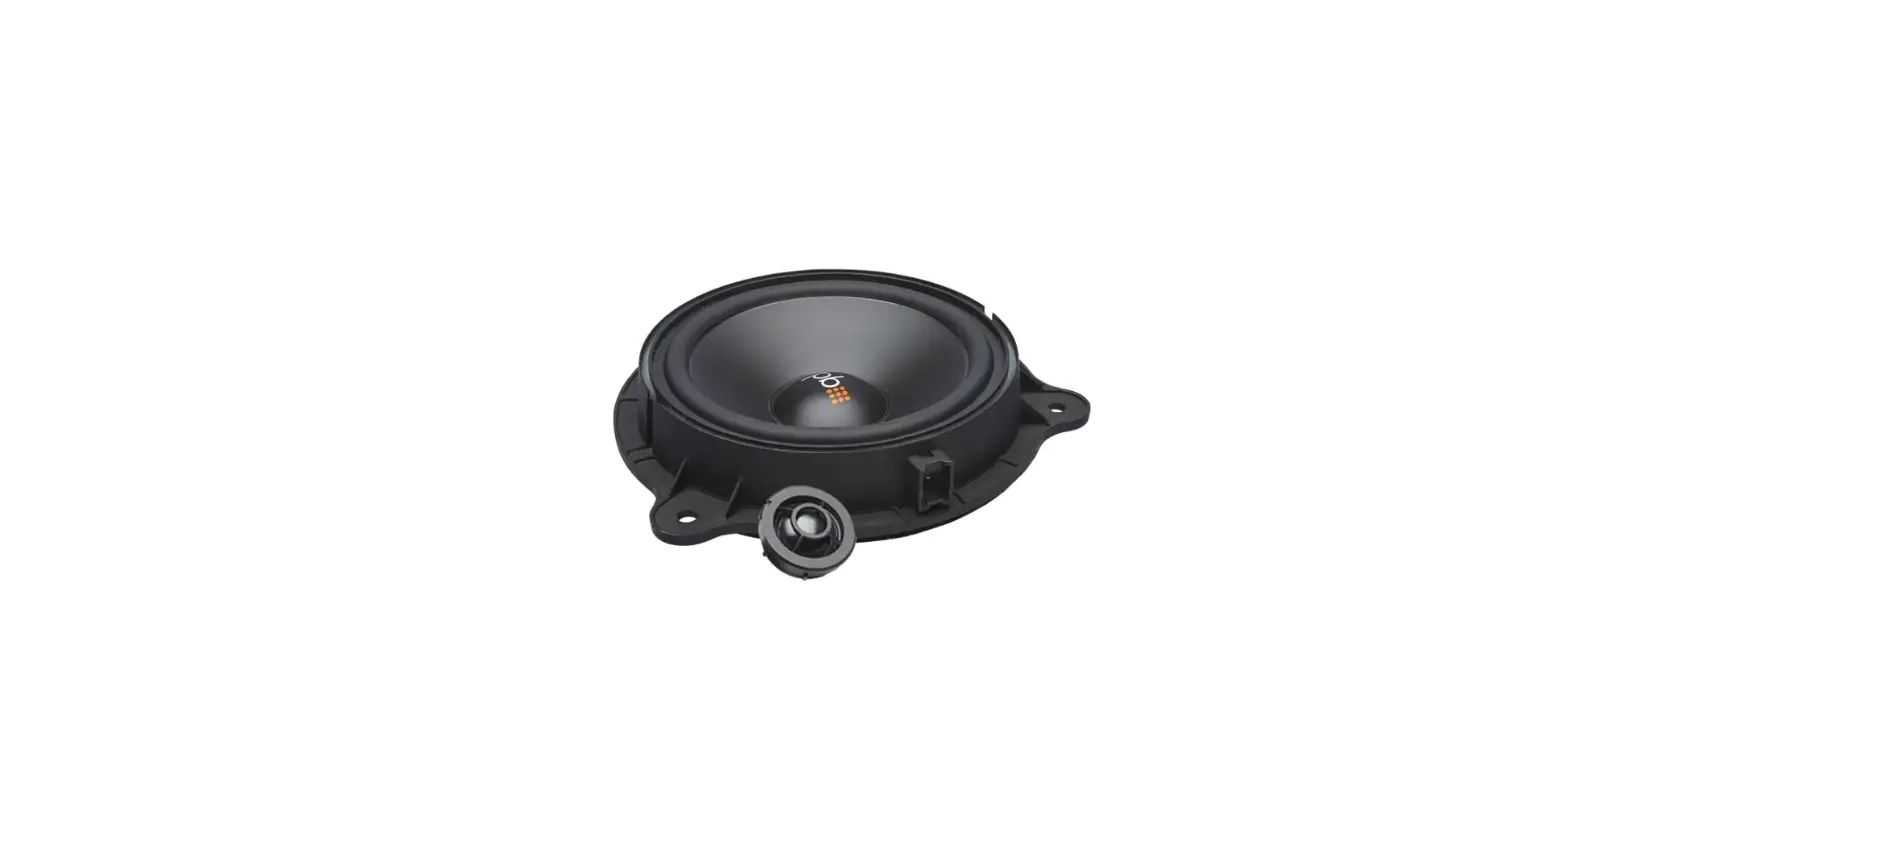 NS-S6501 6.5″ Car Stereo Speakers